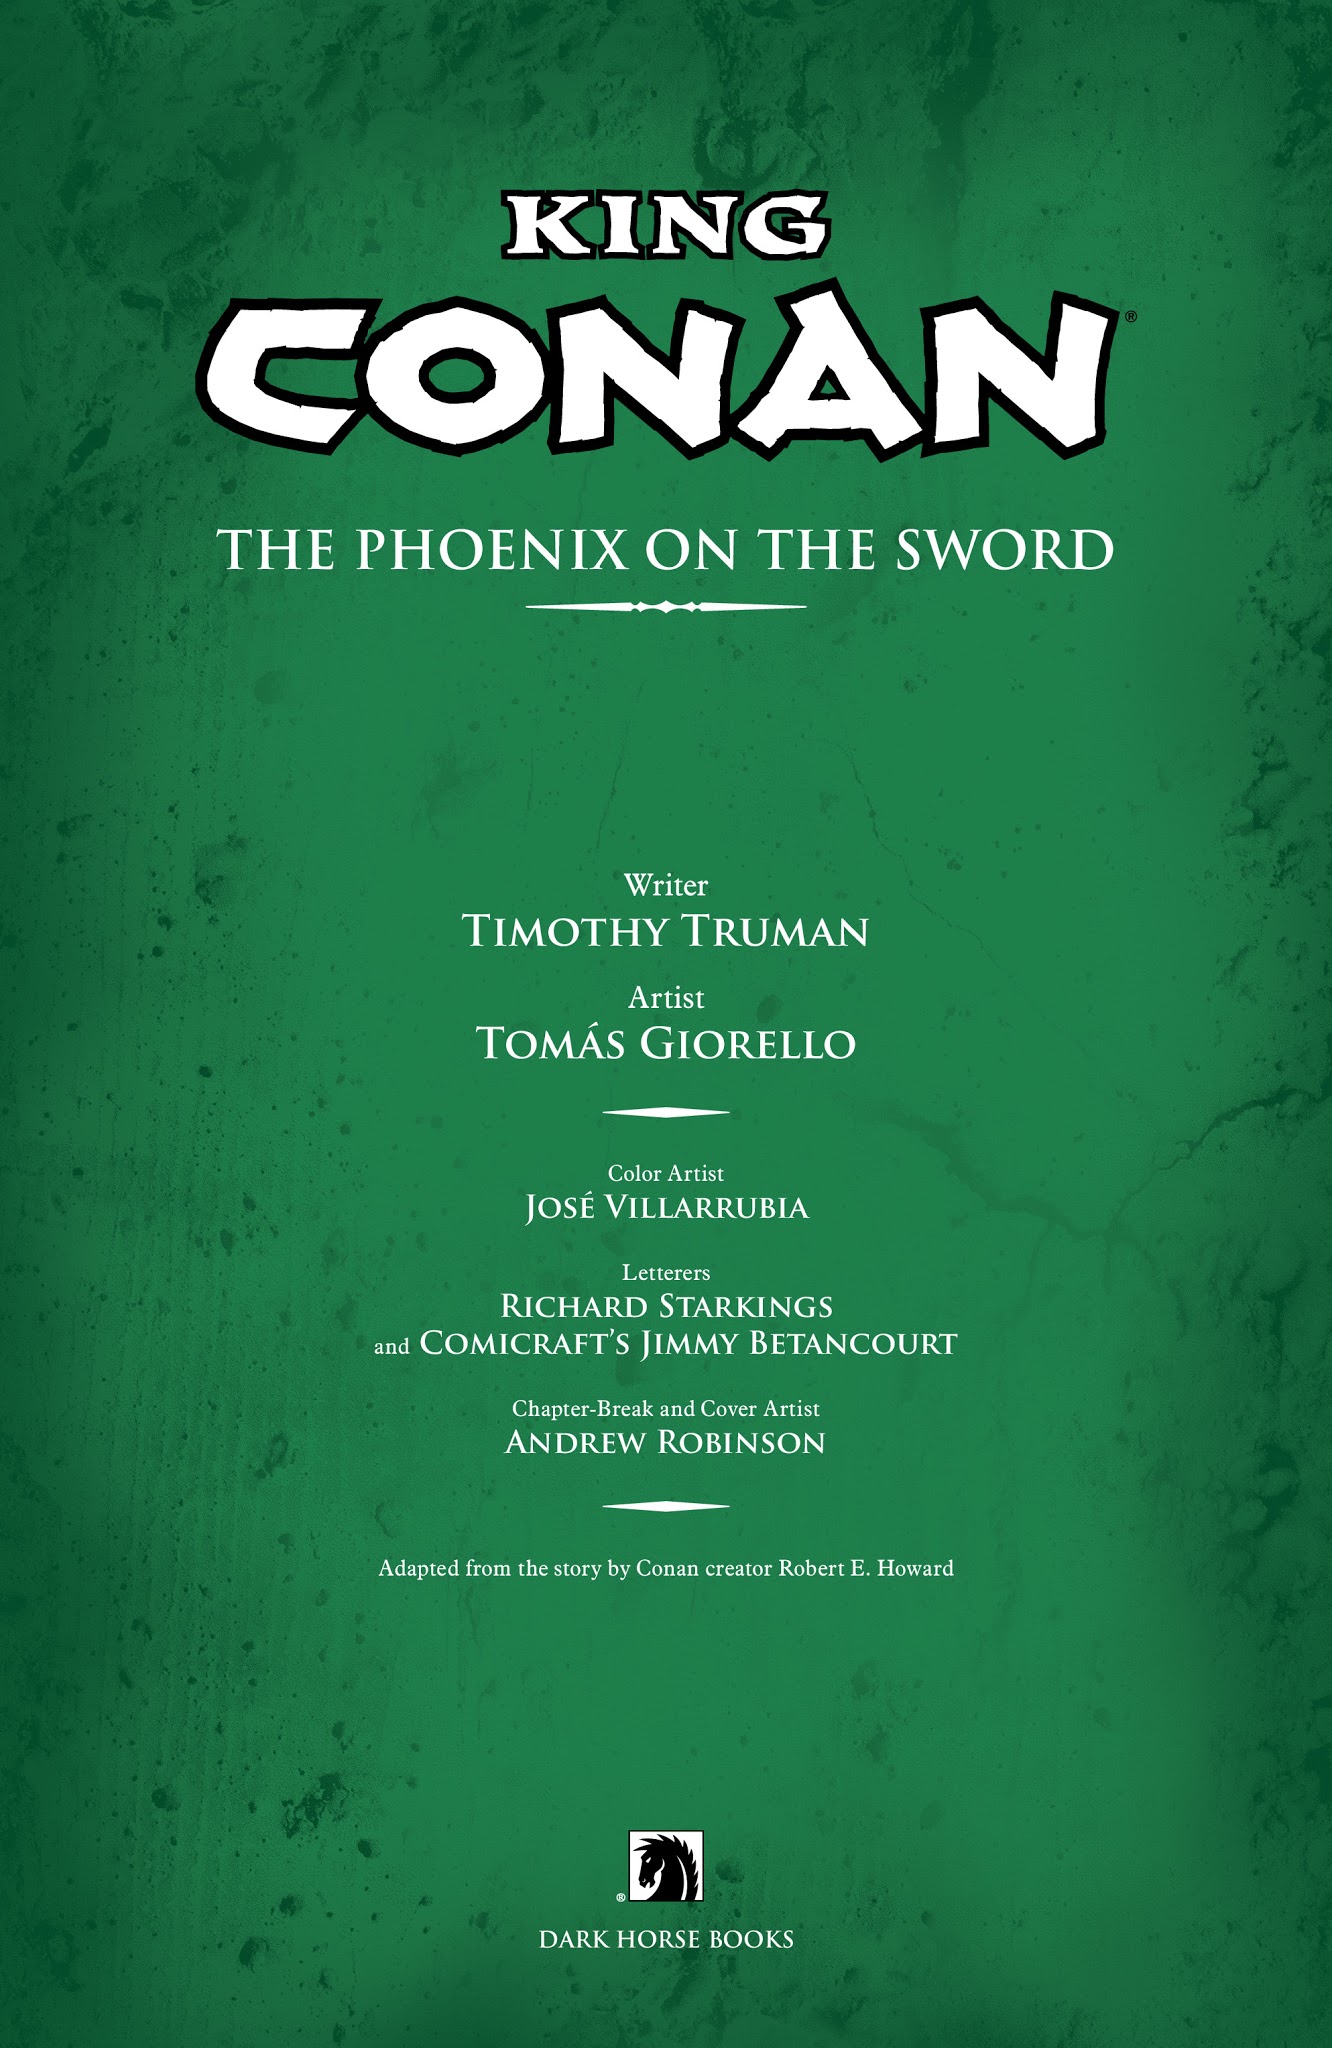 Read online King Conan: The Phoenix on the Sword comic -  Issue # TPB - 5